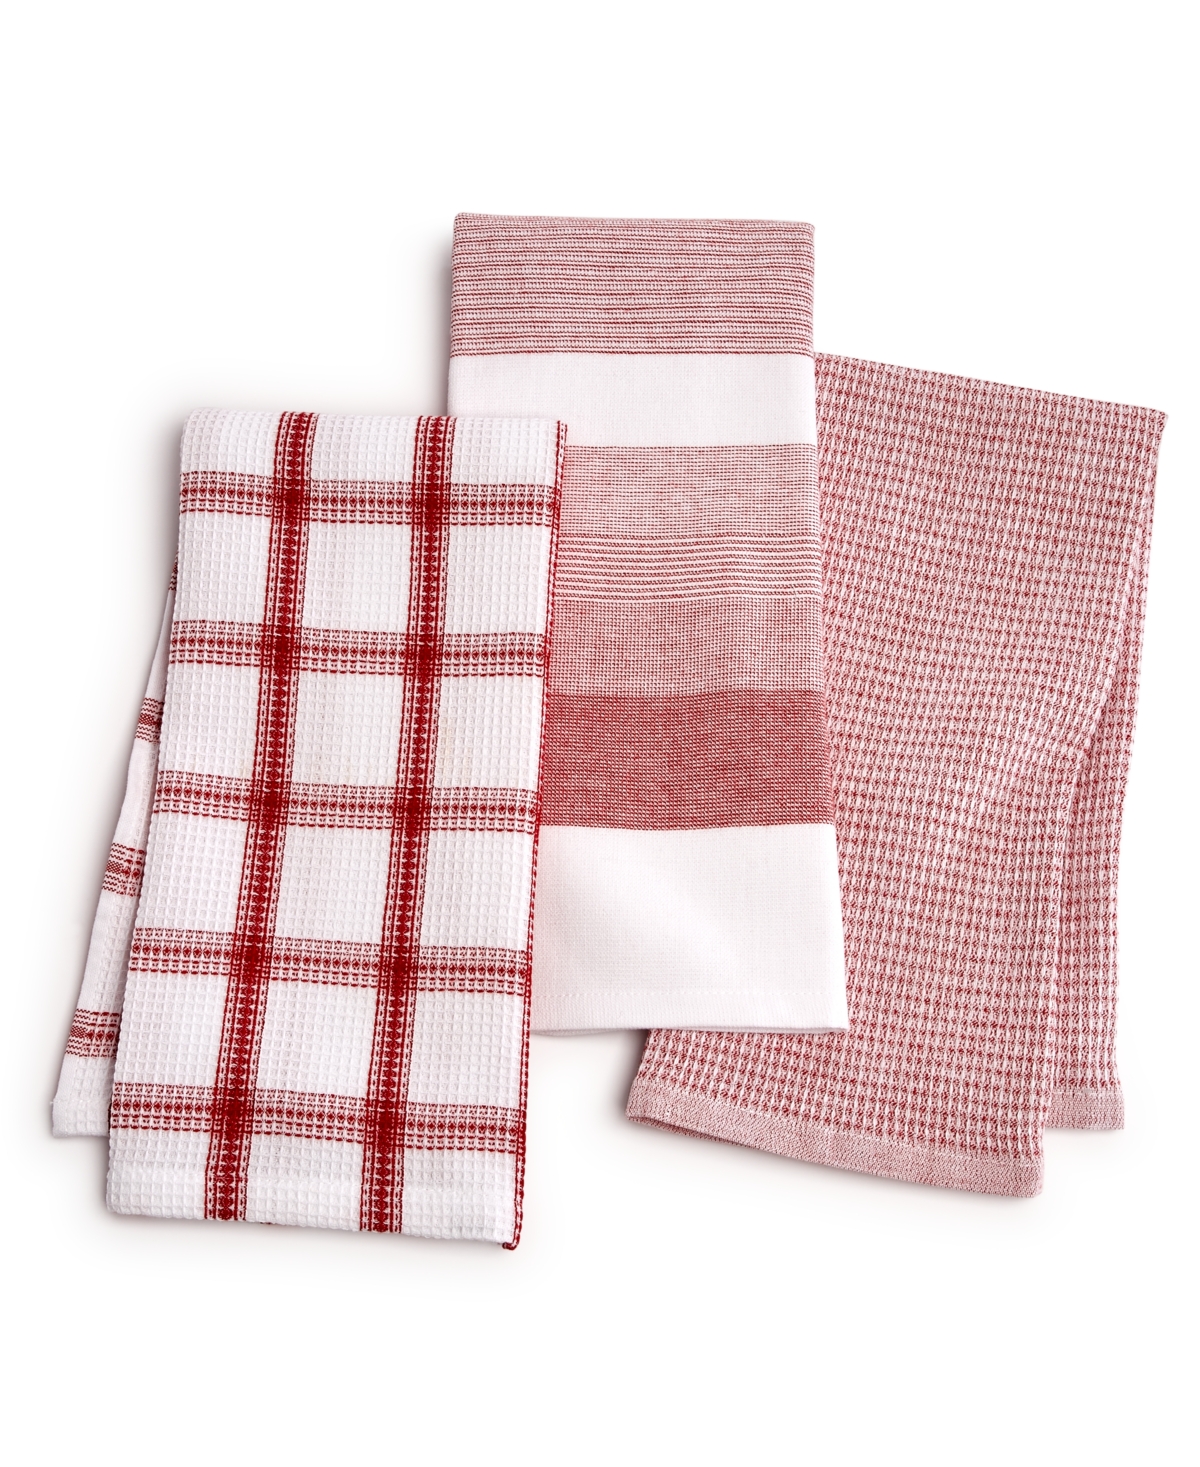 3-Pc. Cotton Red Towel Set, Created for Macy's